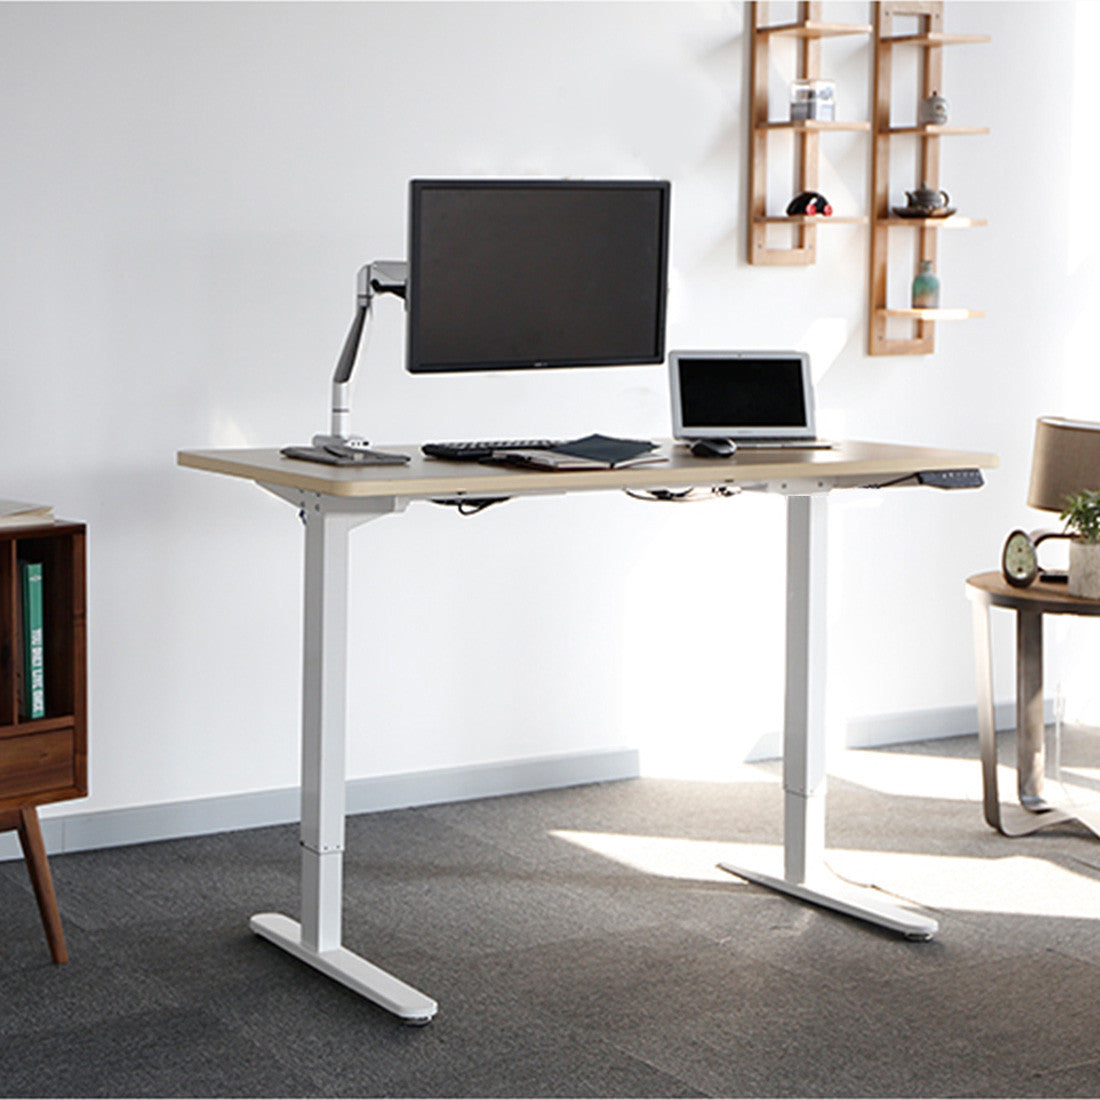 Thingy Club E2b Height Adjustable Electric Standing Desk Frame Only